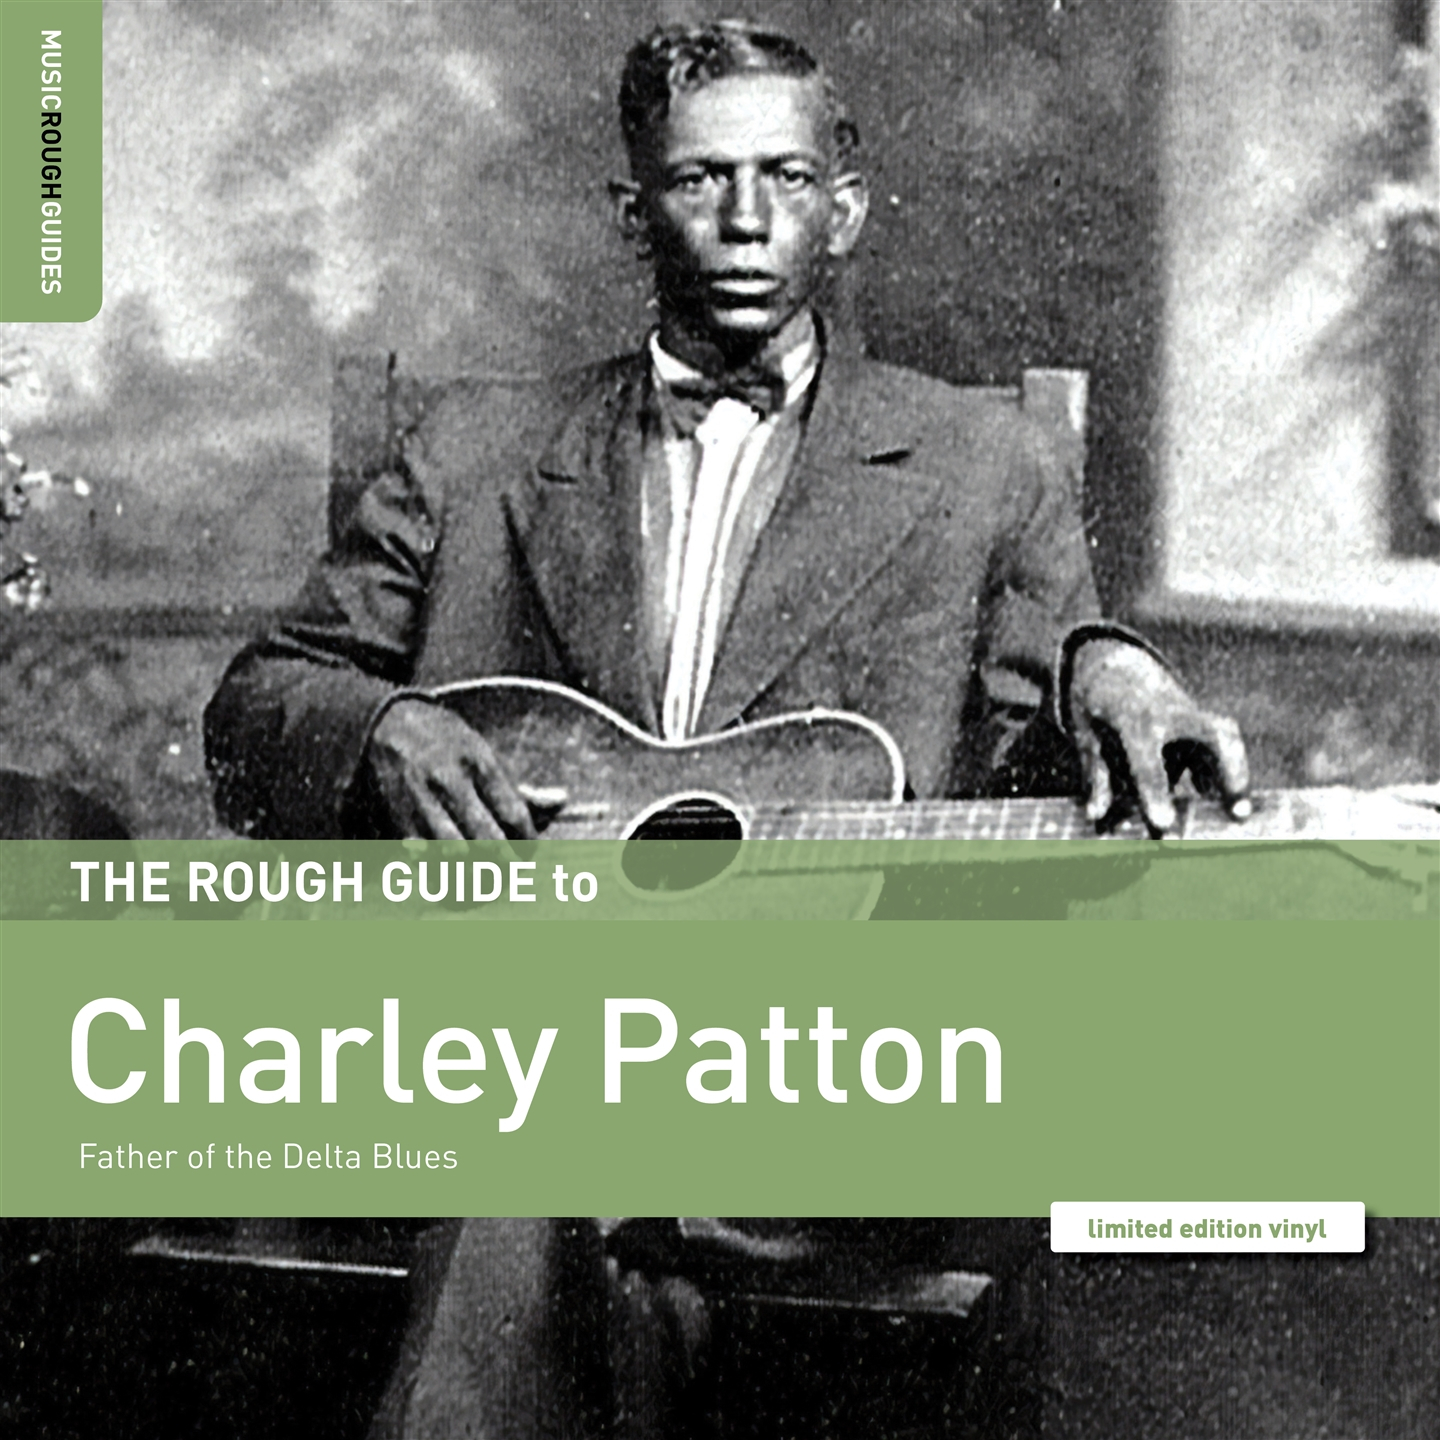 THE ROUGH GUIDE TO CHARLEY PATTON [LP]